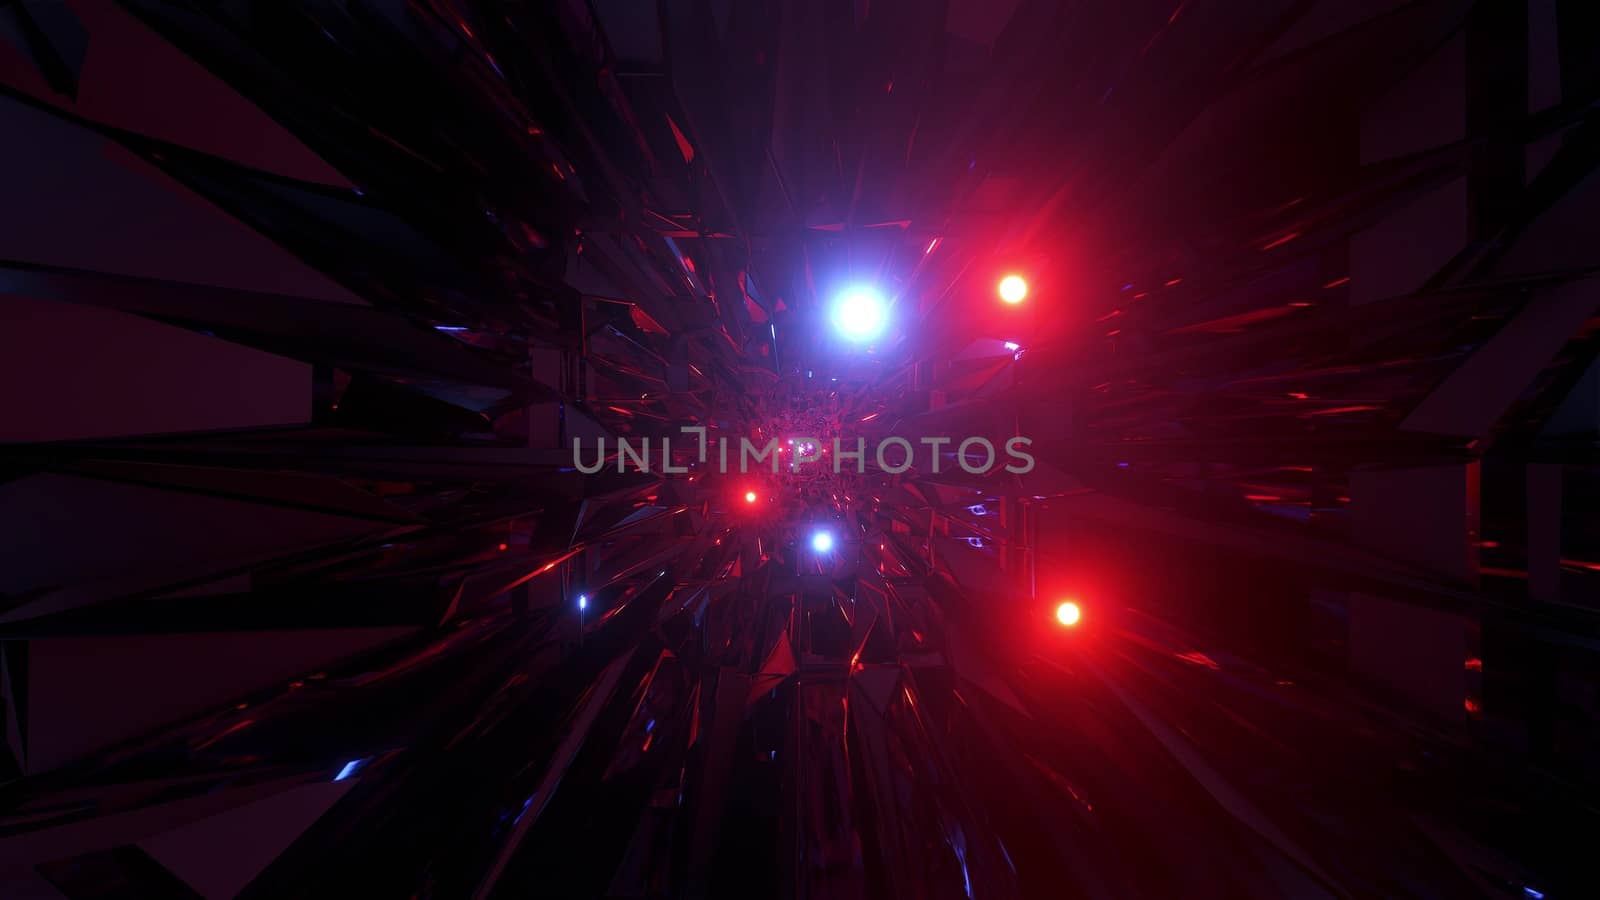 abstract tunnel corridor with glowing spheres 3d illustration backgrounds wallpaper graphic artwork, highly abstract reflection tunnel with colorful multicolor flying particle spheres 3d rendering design